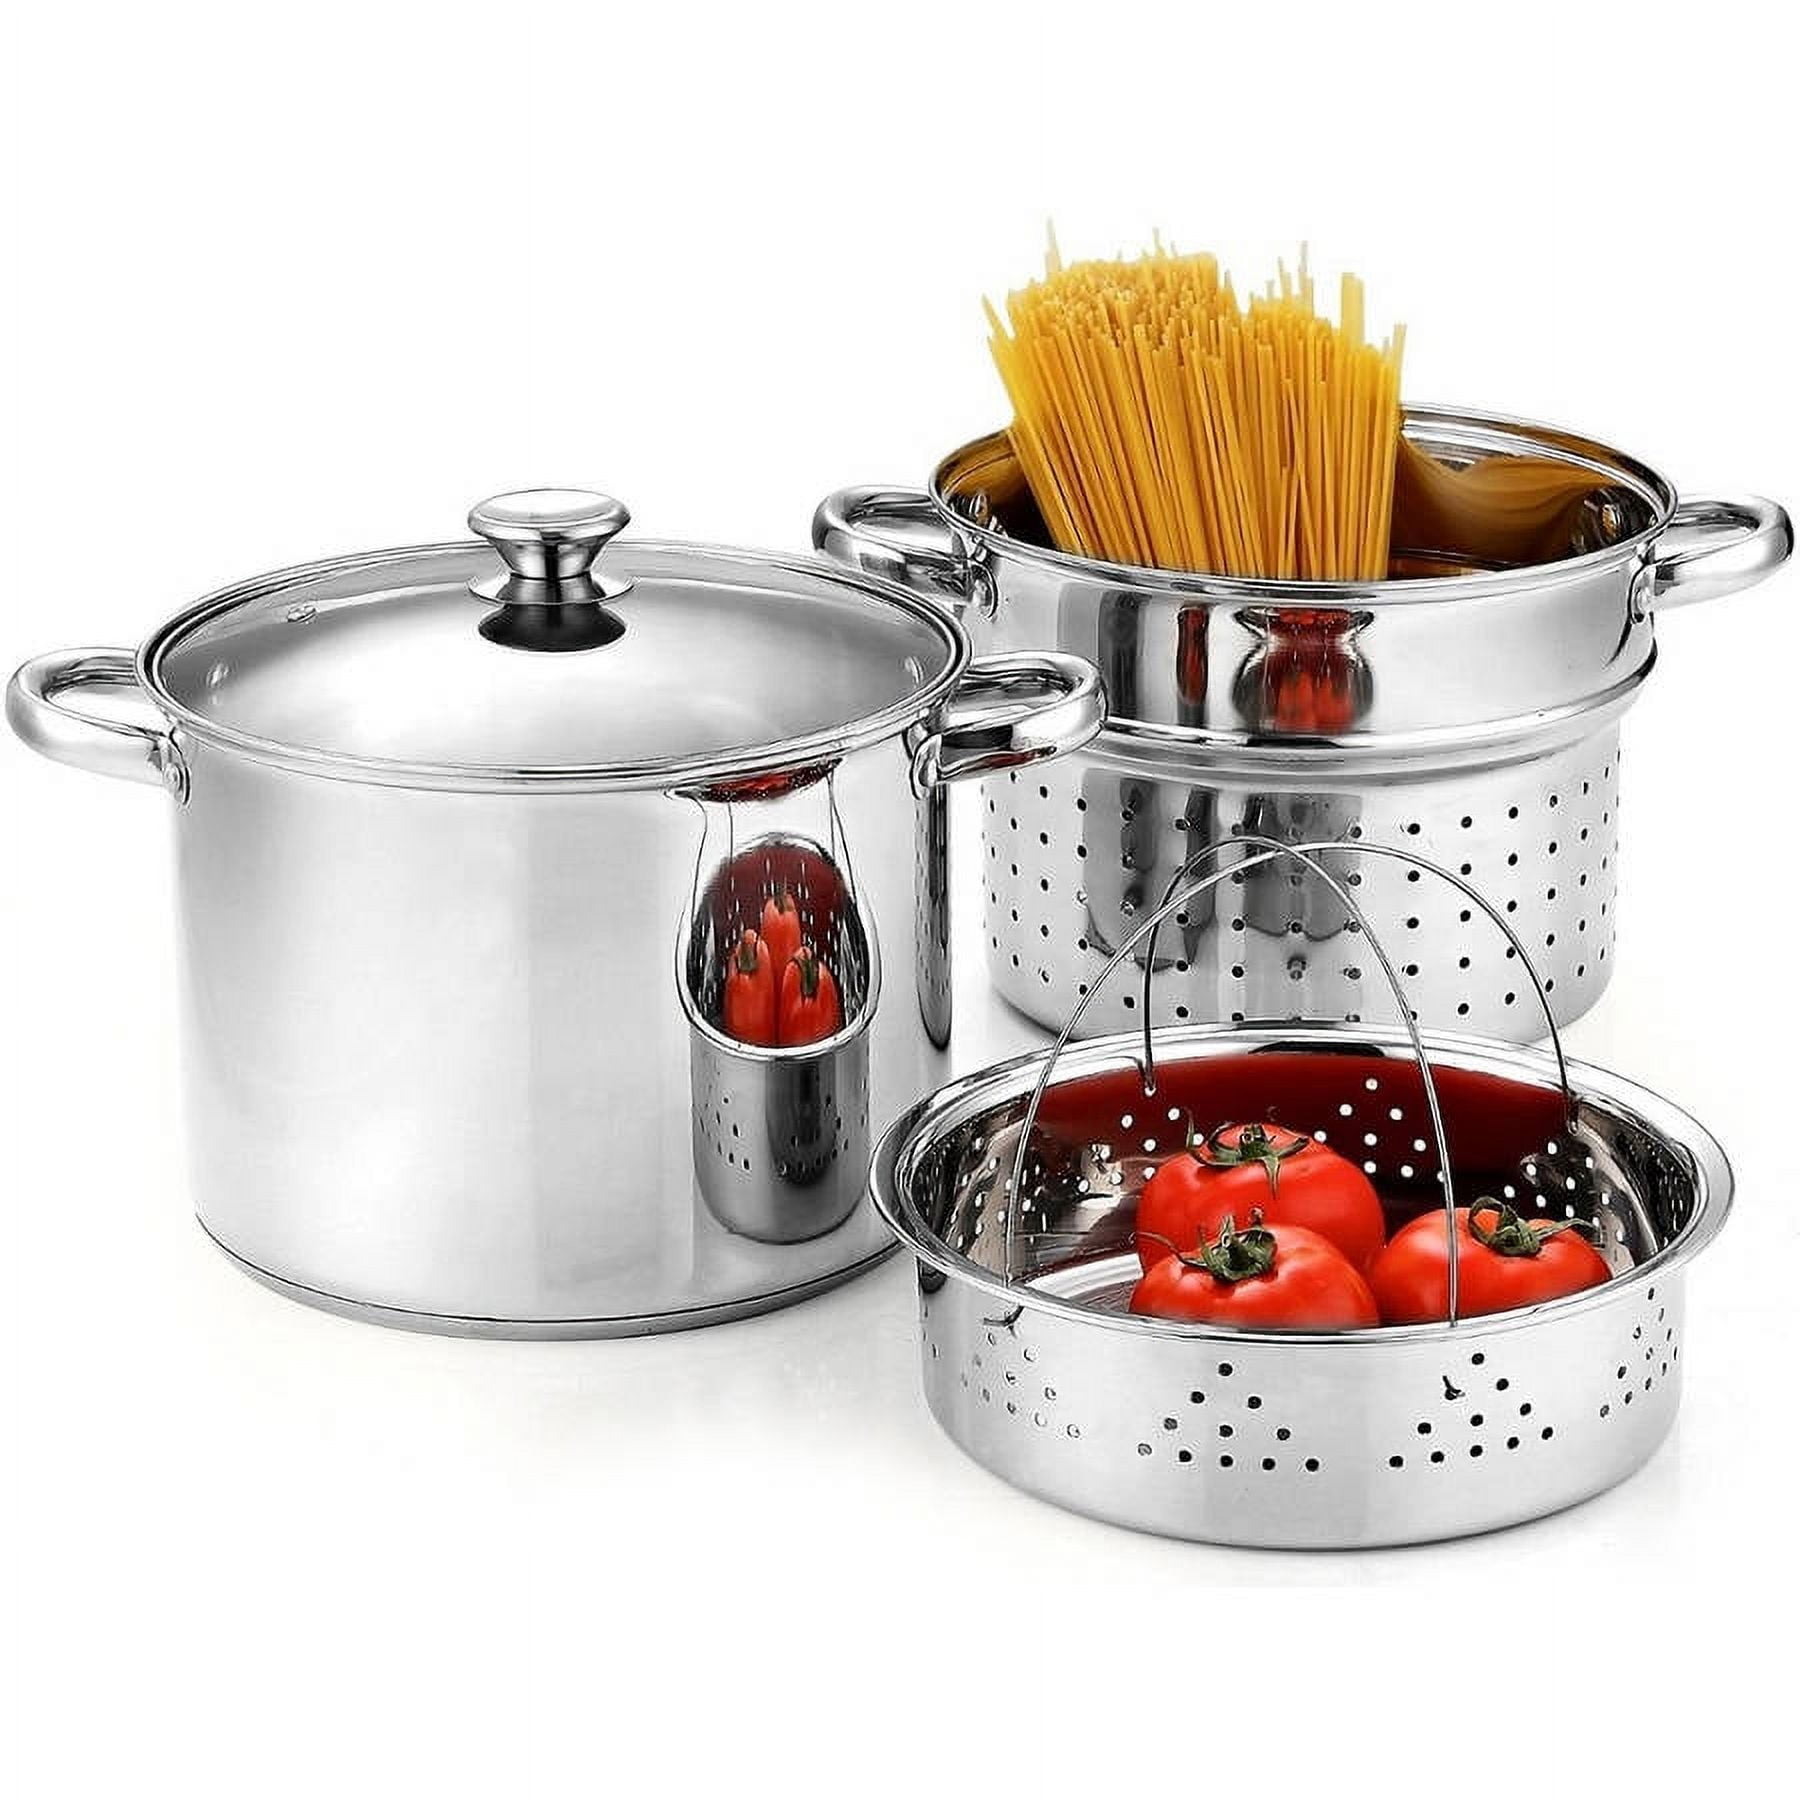 DOITOOL Stovetop Stainless Steel Pasta Pot with Strainer Lid, Nonstick  Spaghetti Pot Noodles Cooking Pot for Cooking Pasta Noodle Veggie or Sauce